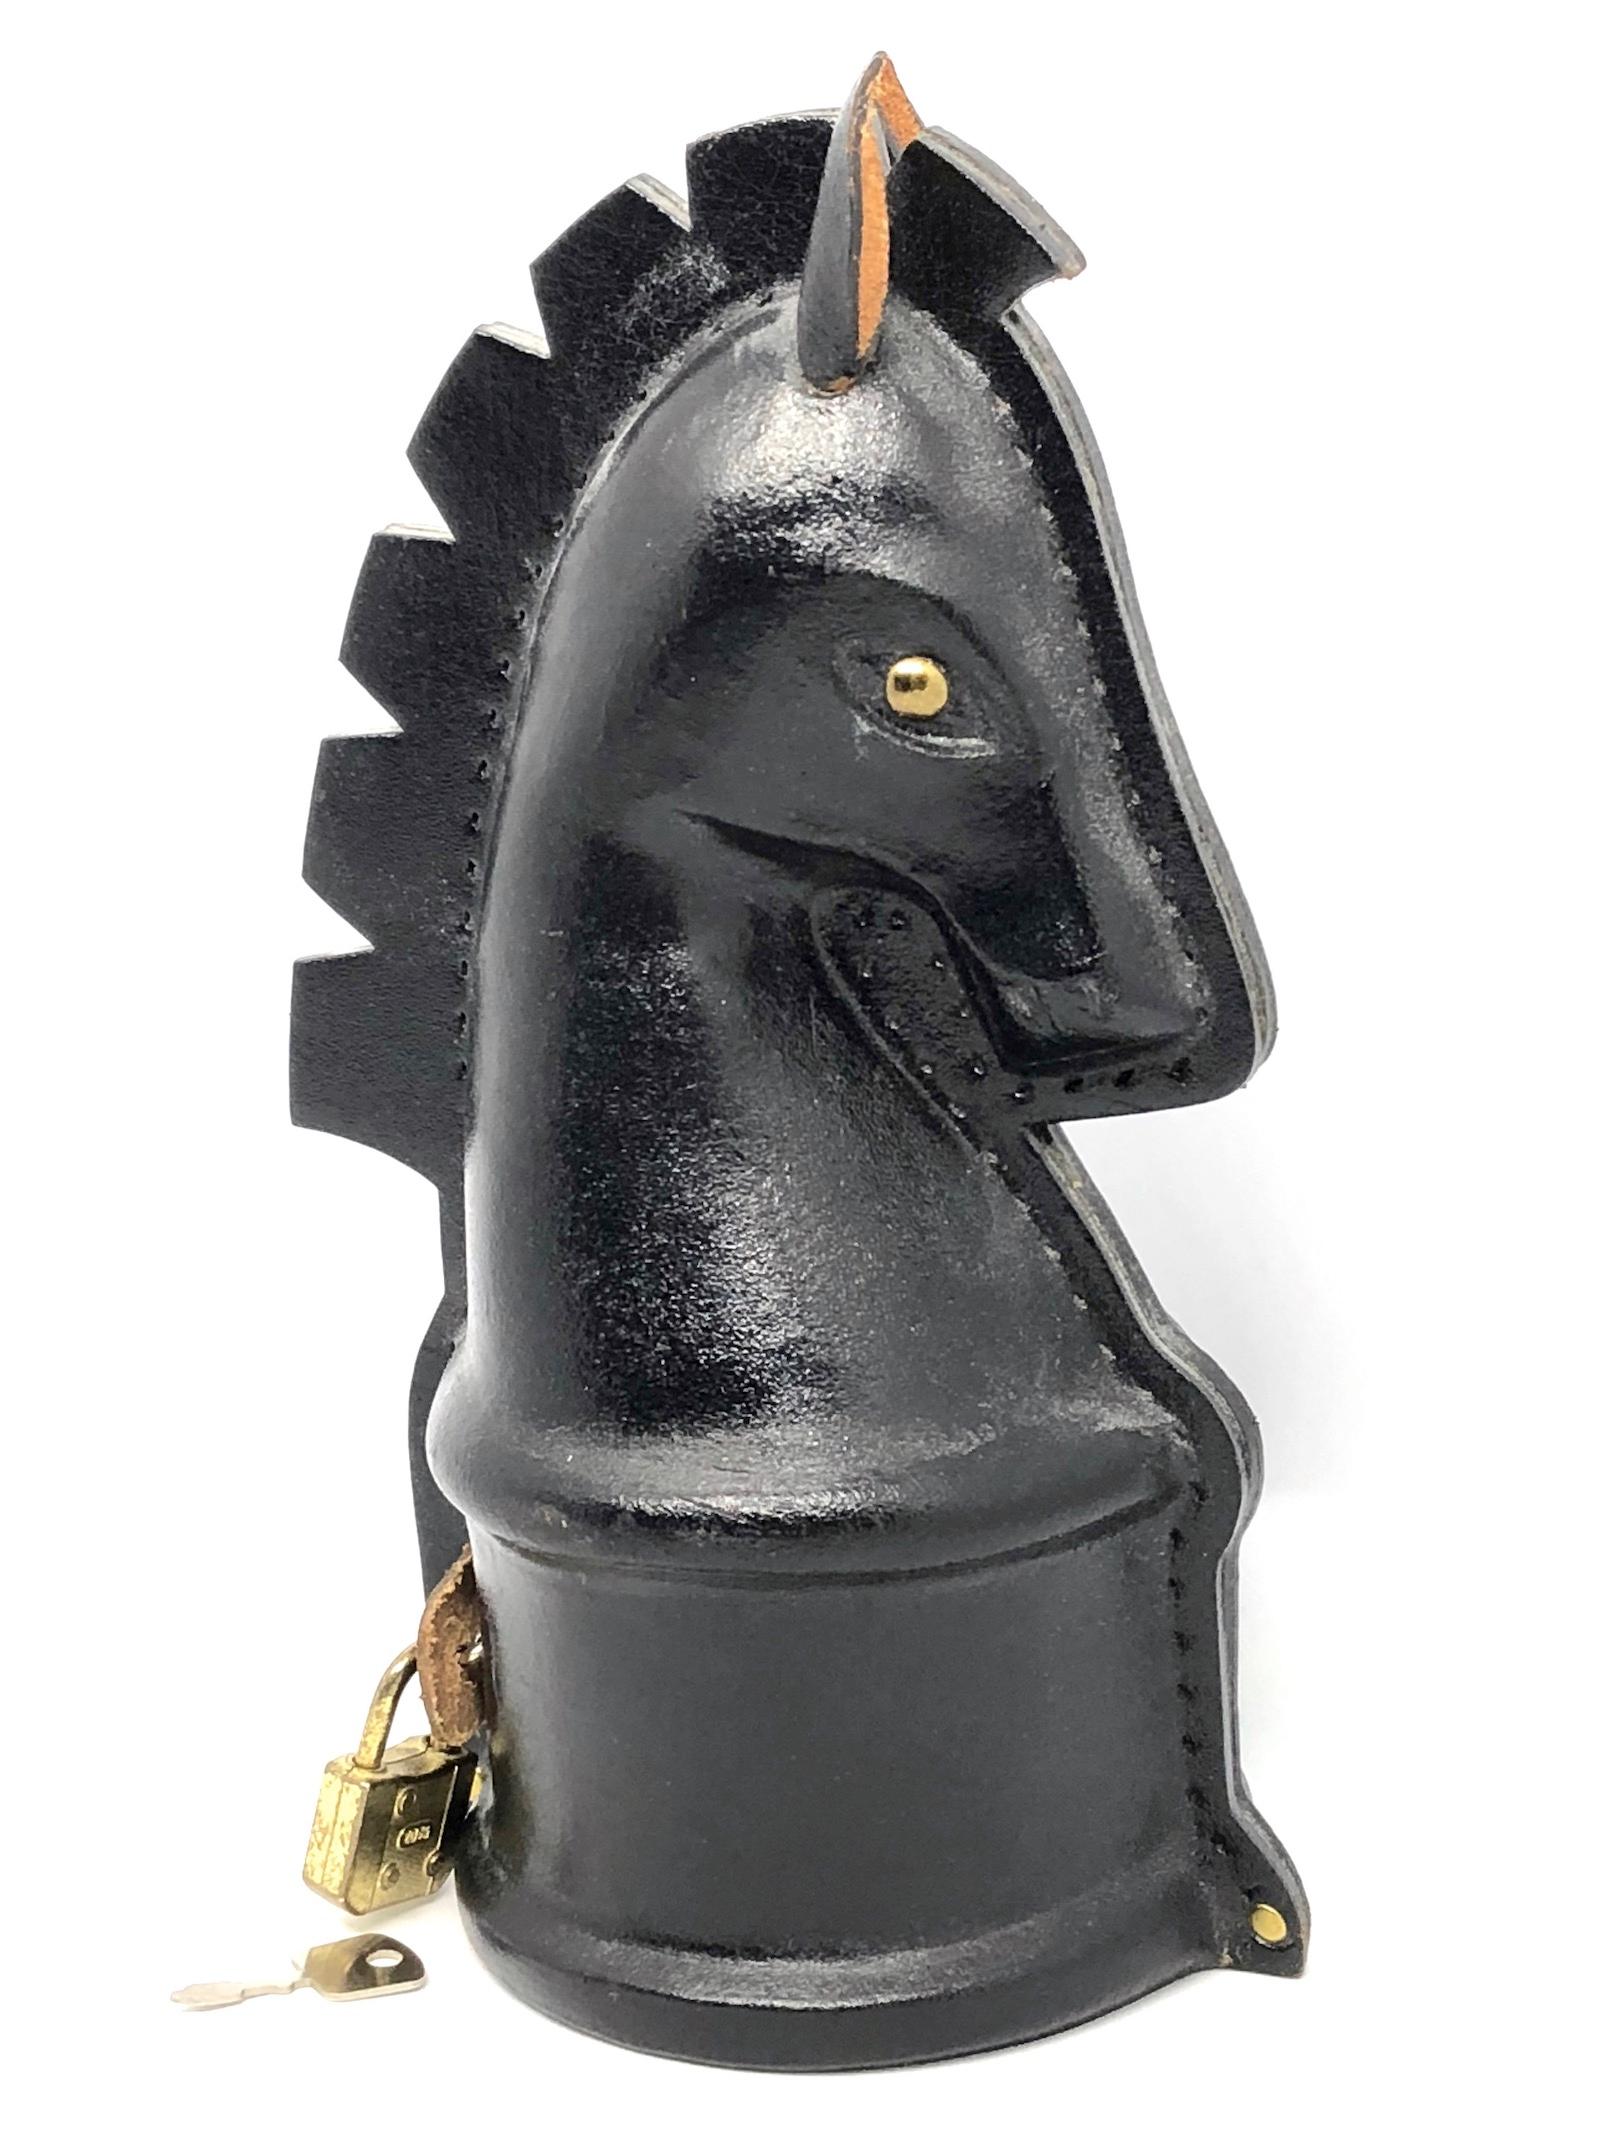 Gorgeous vintage leather made horse money bank. A beautiful decorative item in black leather with a small metal lock. It has the original old Key. Made in Europe circa 1970s. Nice addition to any man cave, living room or children's room.